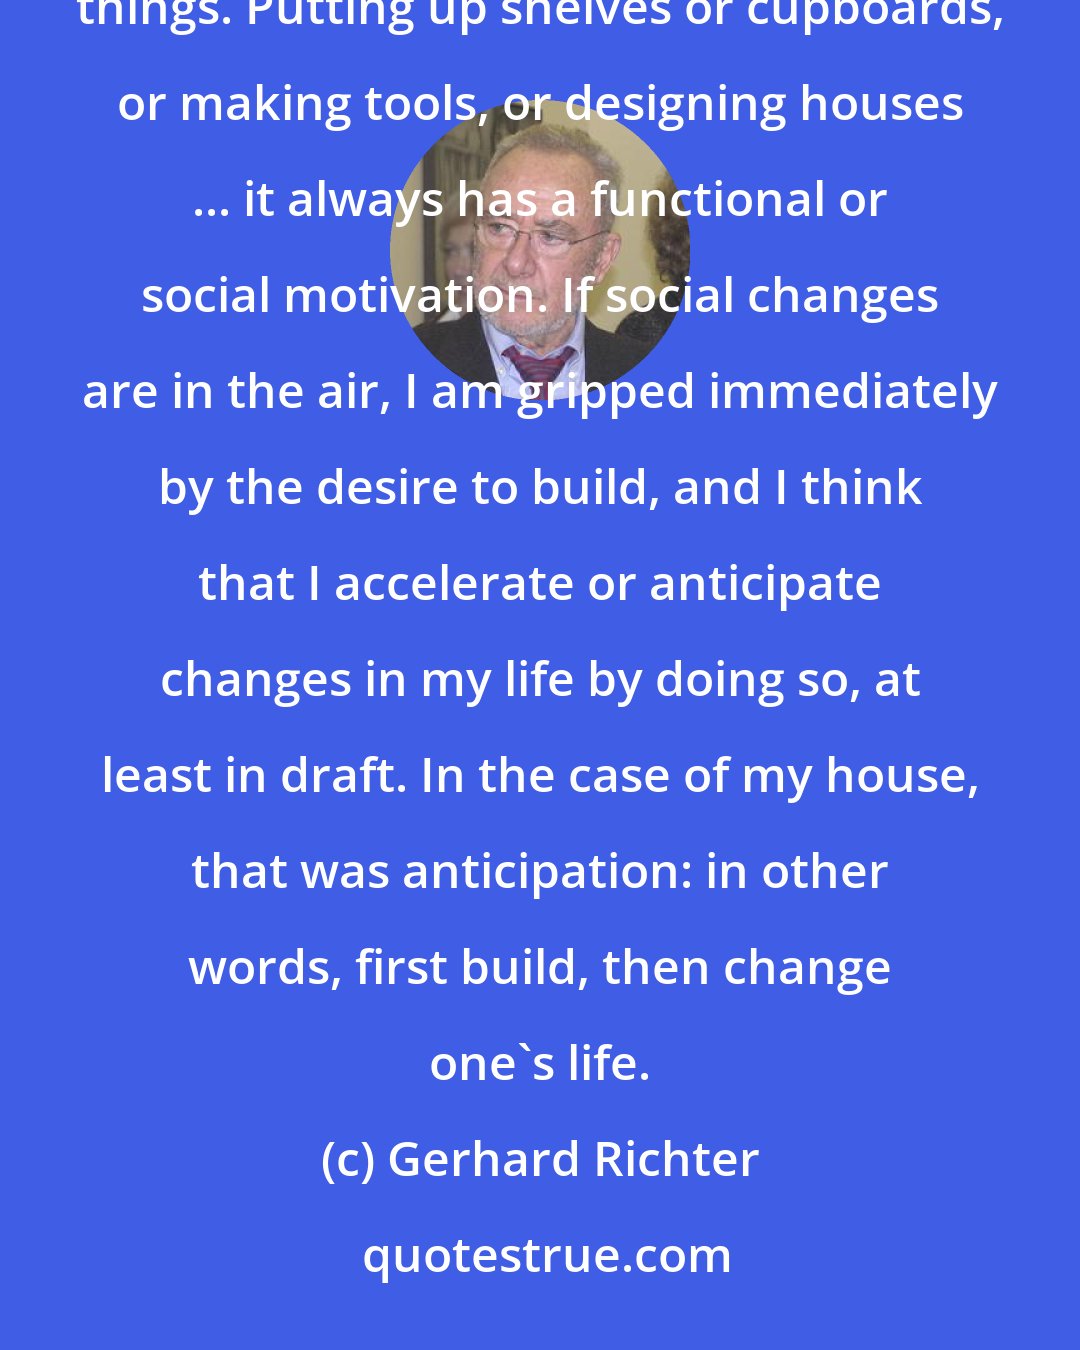 Gerhard Richter: Architecture was, or is, a kind of hobby, an inclination I have to fiddling around and building things. Putting up shelves or cupboards, or making tools, or designing houses ... it always has a functional or social motivation. If social changes are in the air, I am gripped immediately by the desire to build, and I think that I accelerate or anticipate changes in my life by doing so, at least in draft. In the case of my house, that was anticipation: in other words, first build, then change one's life.